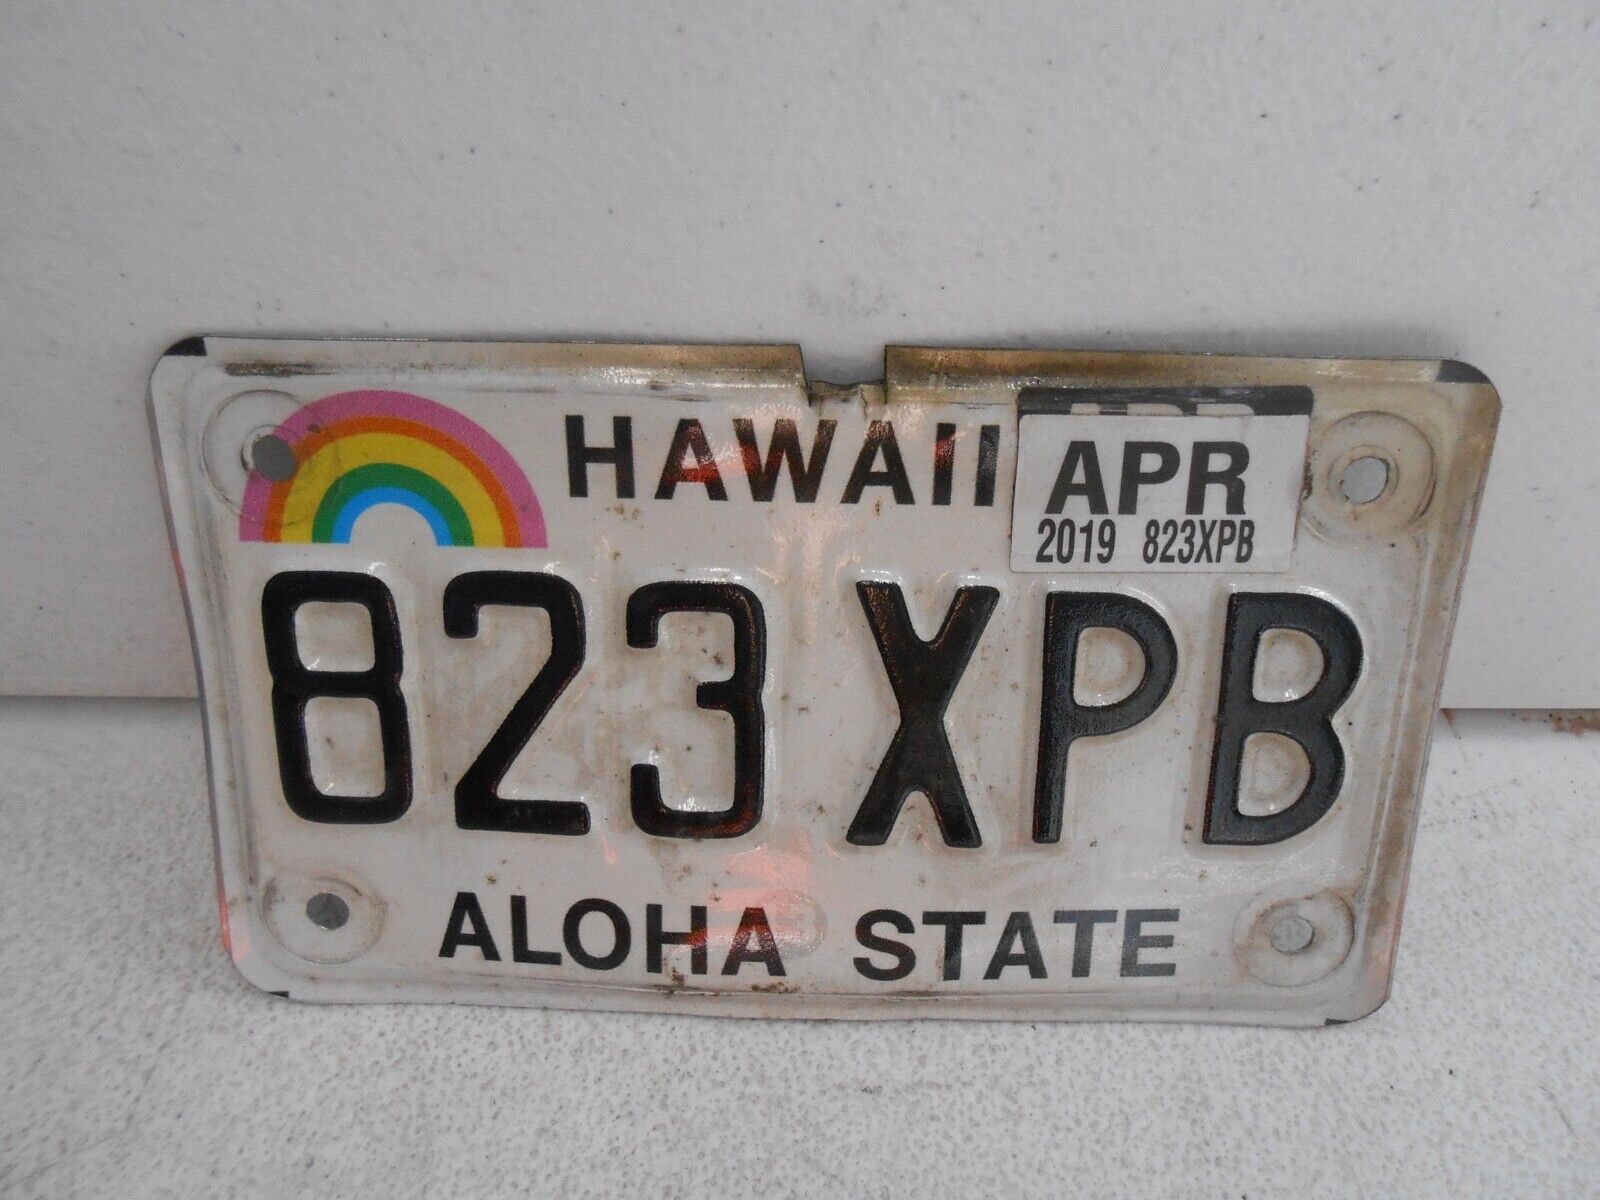 Hawaii Aloha State Motorcycle Moped Scooter License Plate 823 Xpb April 2019